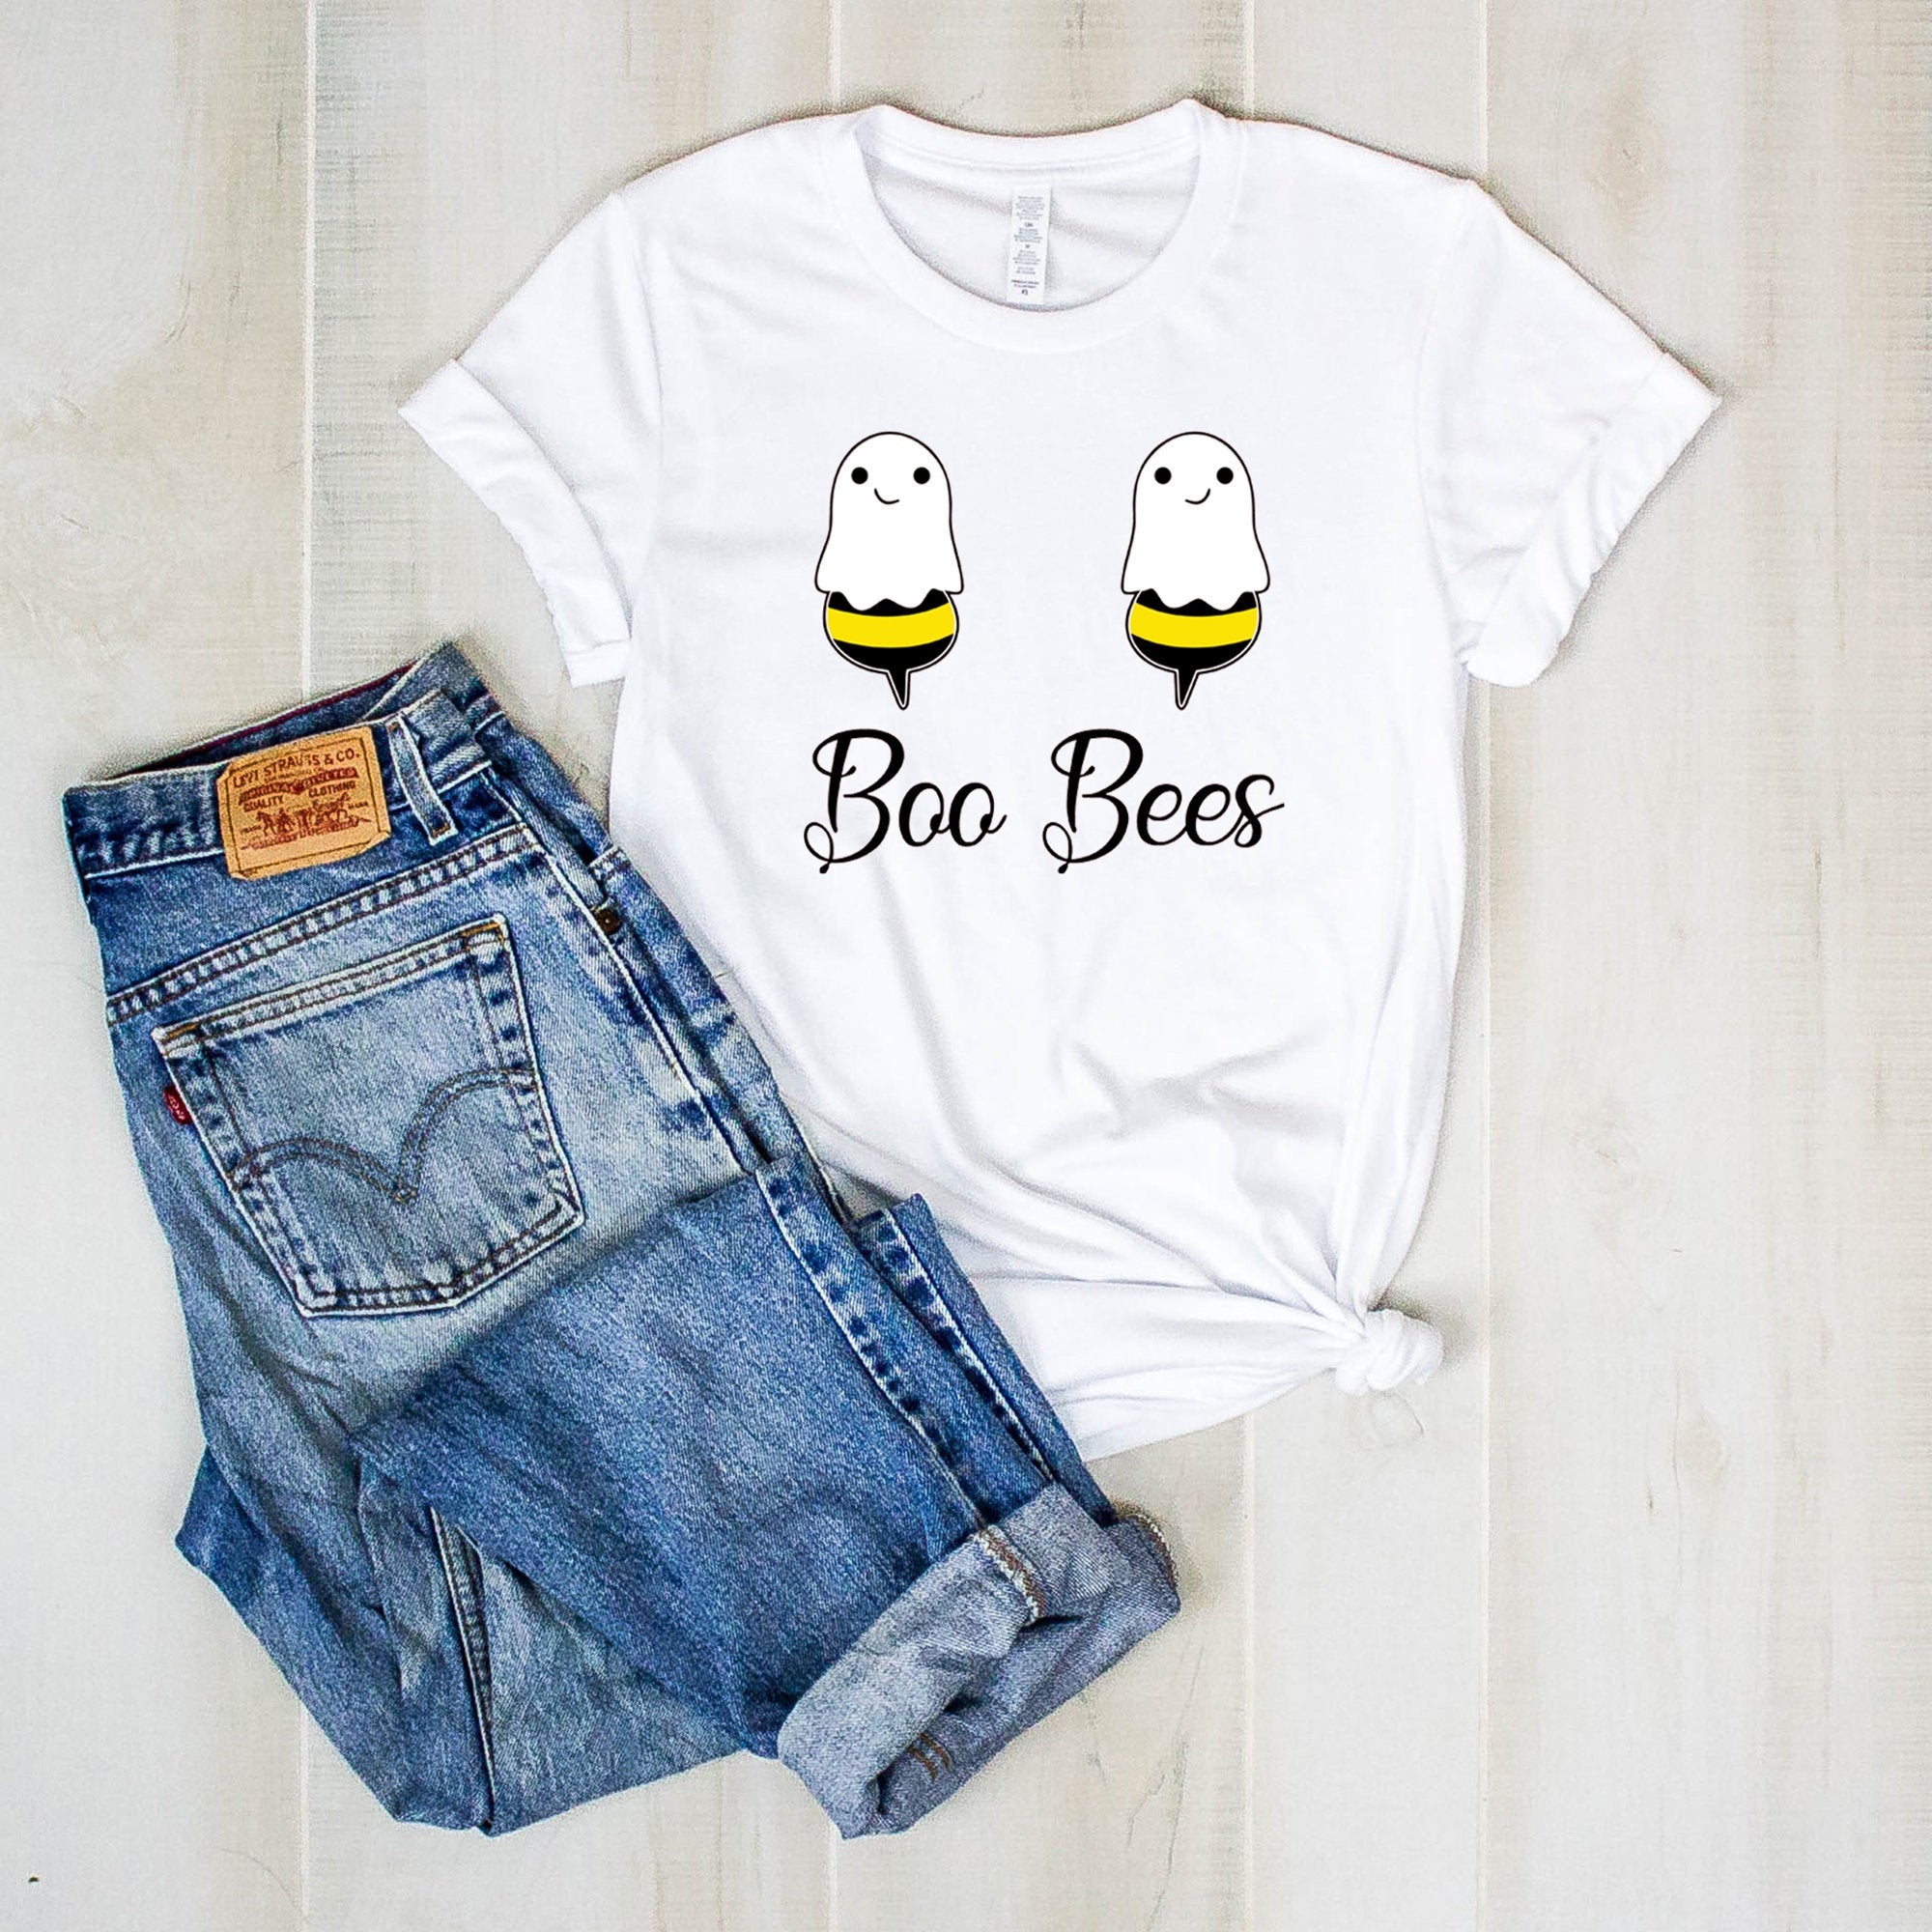 Boo Bees Shirt, Boobies, Women's Funny Halloween, Ghost Bees